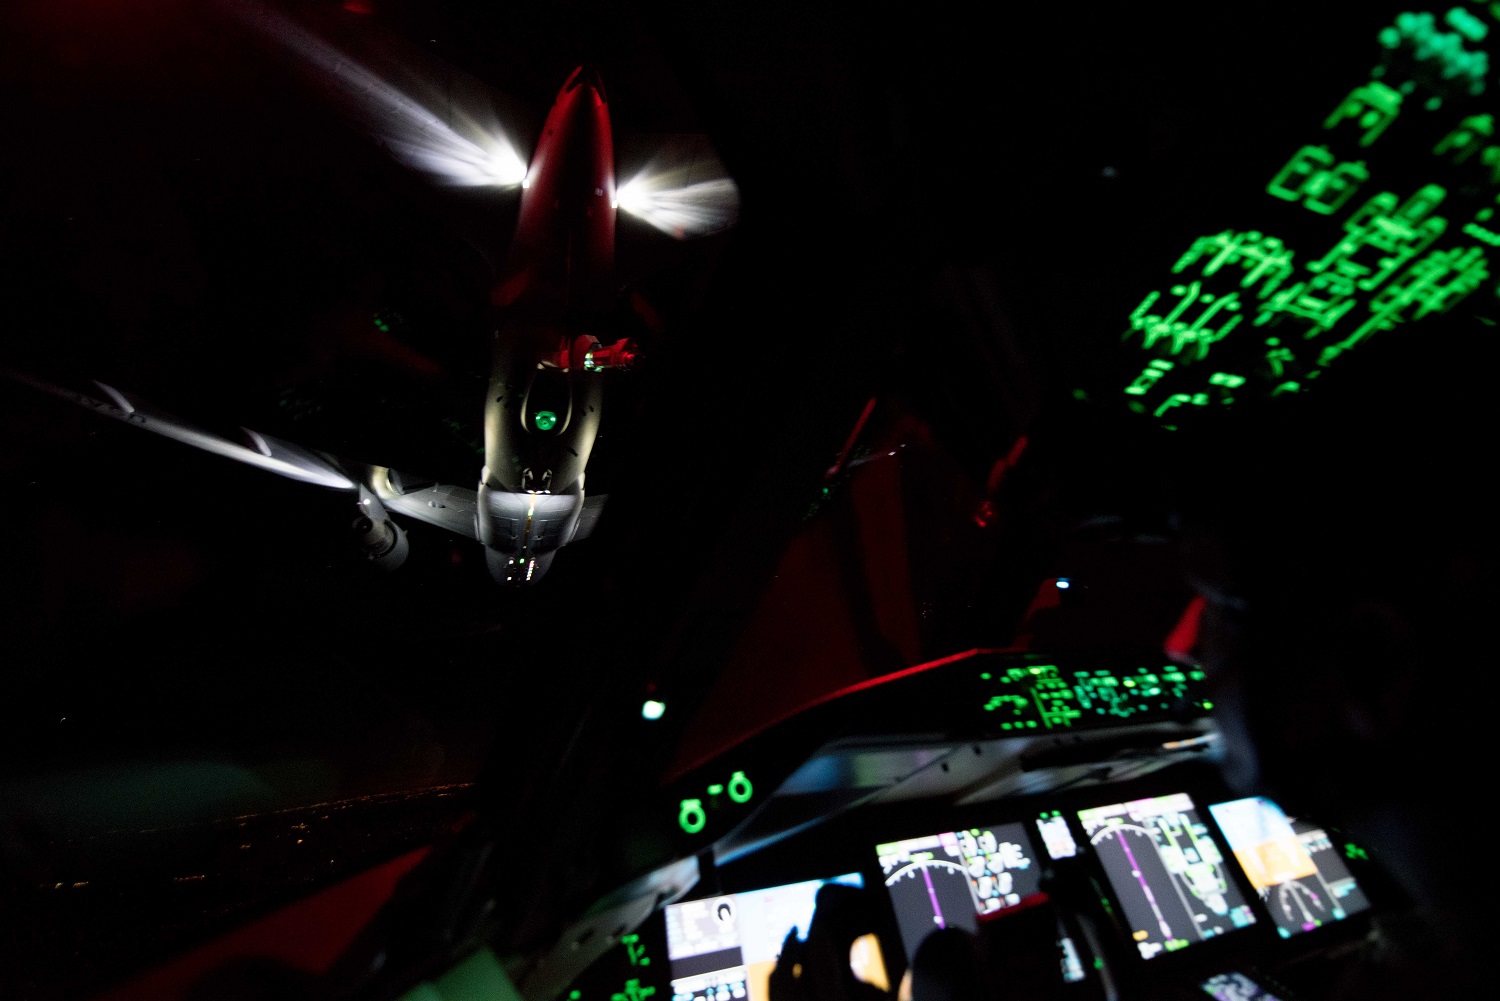 US Air Force Tests KC-46 Pegasus for Night Vision Goggles-Compatibility